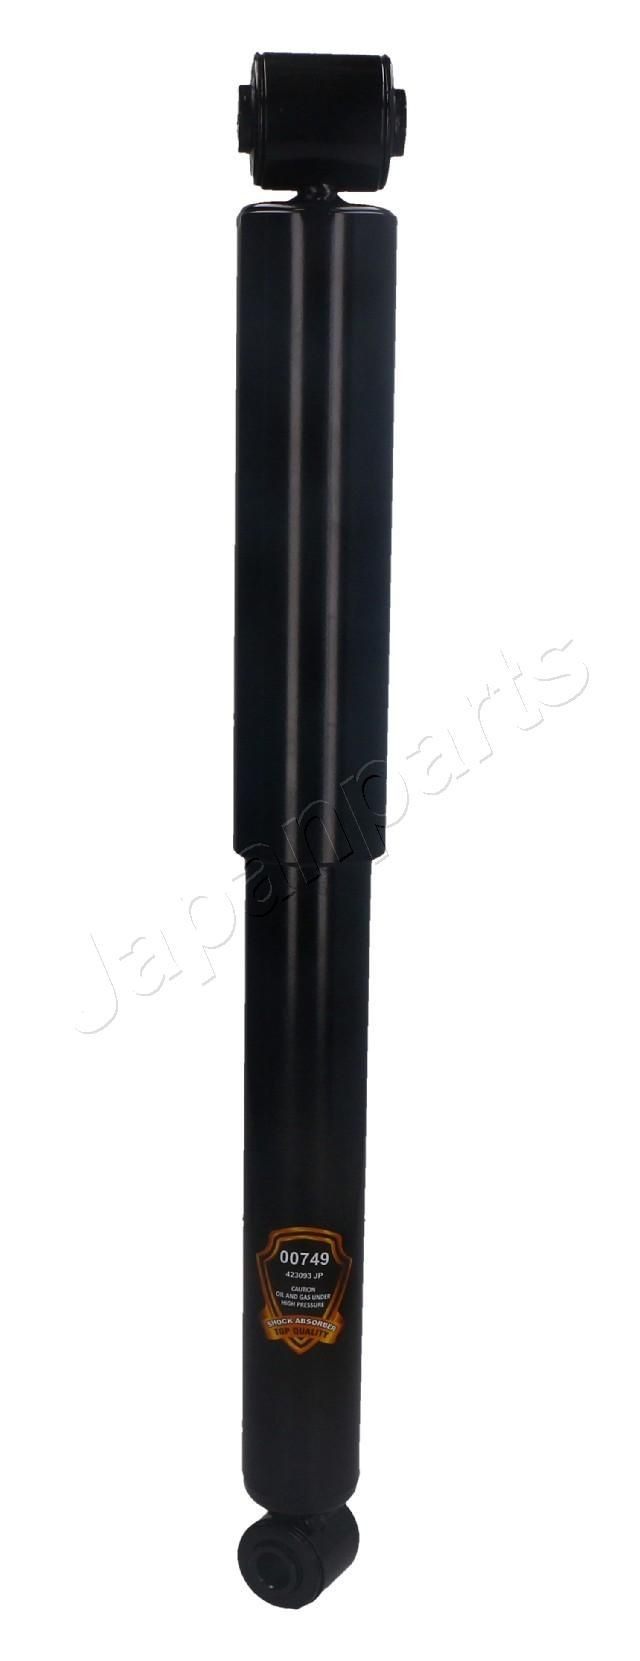 JAPANPARTS MM-00749 Shock absorber D05 130 29N